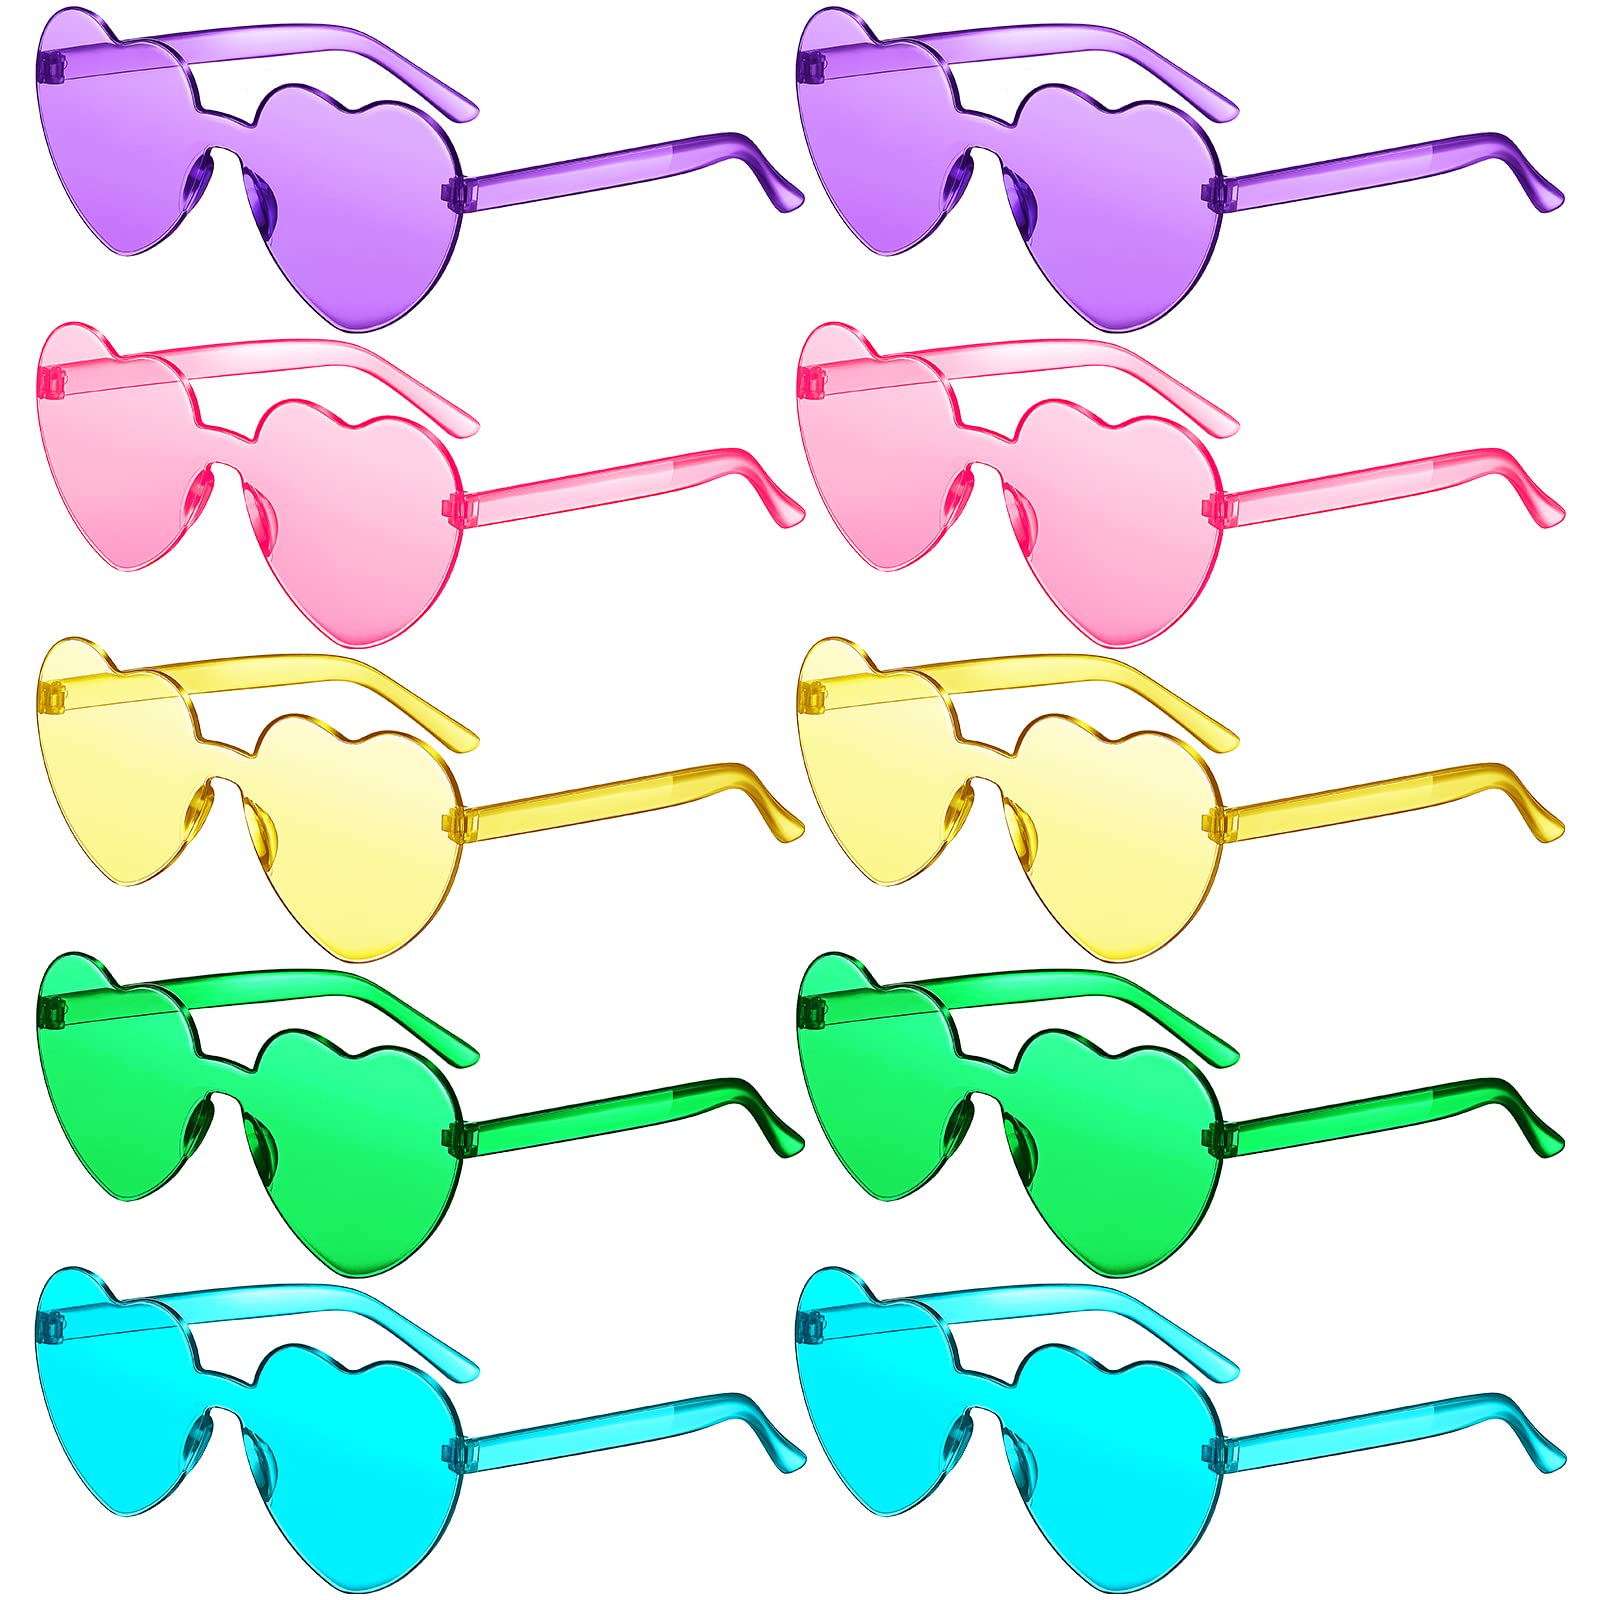 Toodoo 10 Pairs Heart Shaped Sunglasses Rainbow Sunglasses Candy Color Rimless Glasses For Women Girl Party Favor(Pink, Lake Blu